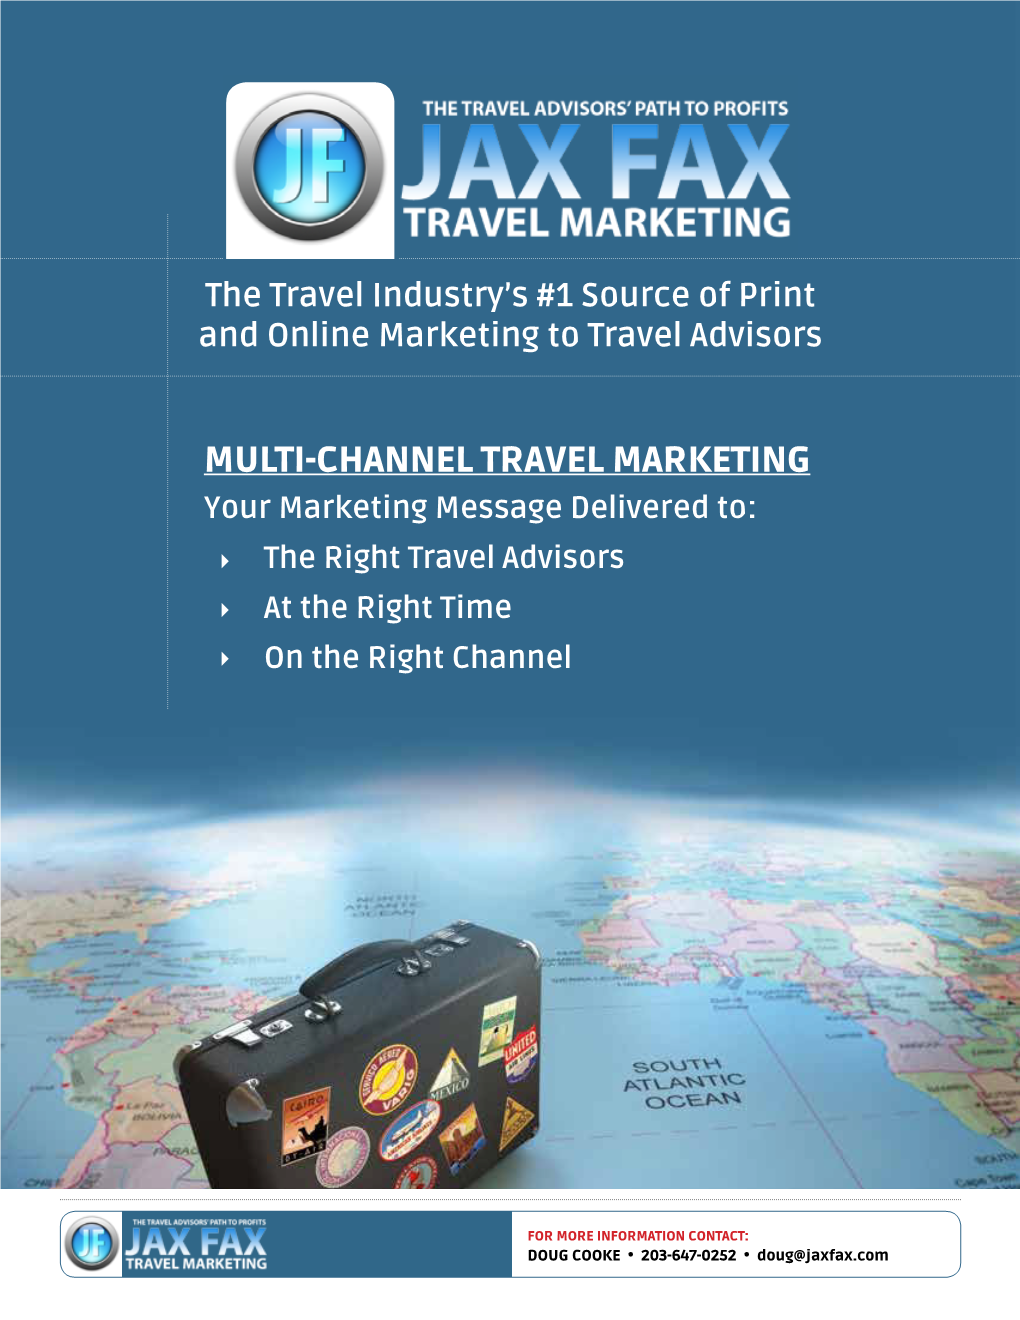 MULTI-CHANNEL TRAVEL MARKETING Your Marketing Message Delivered To: the Right Travel Advisors at the Right Time on the Right Channel